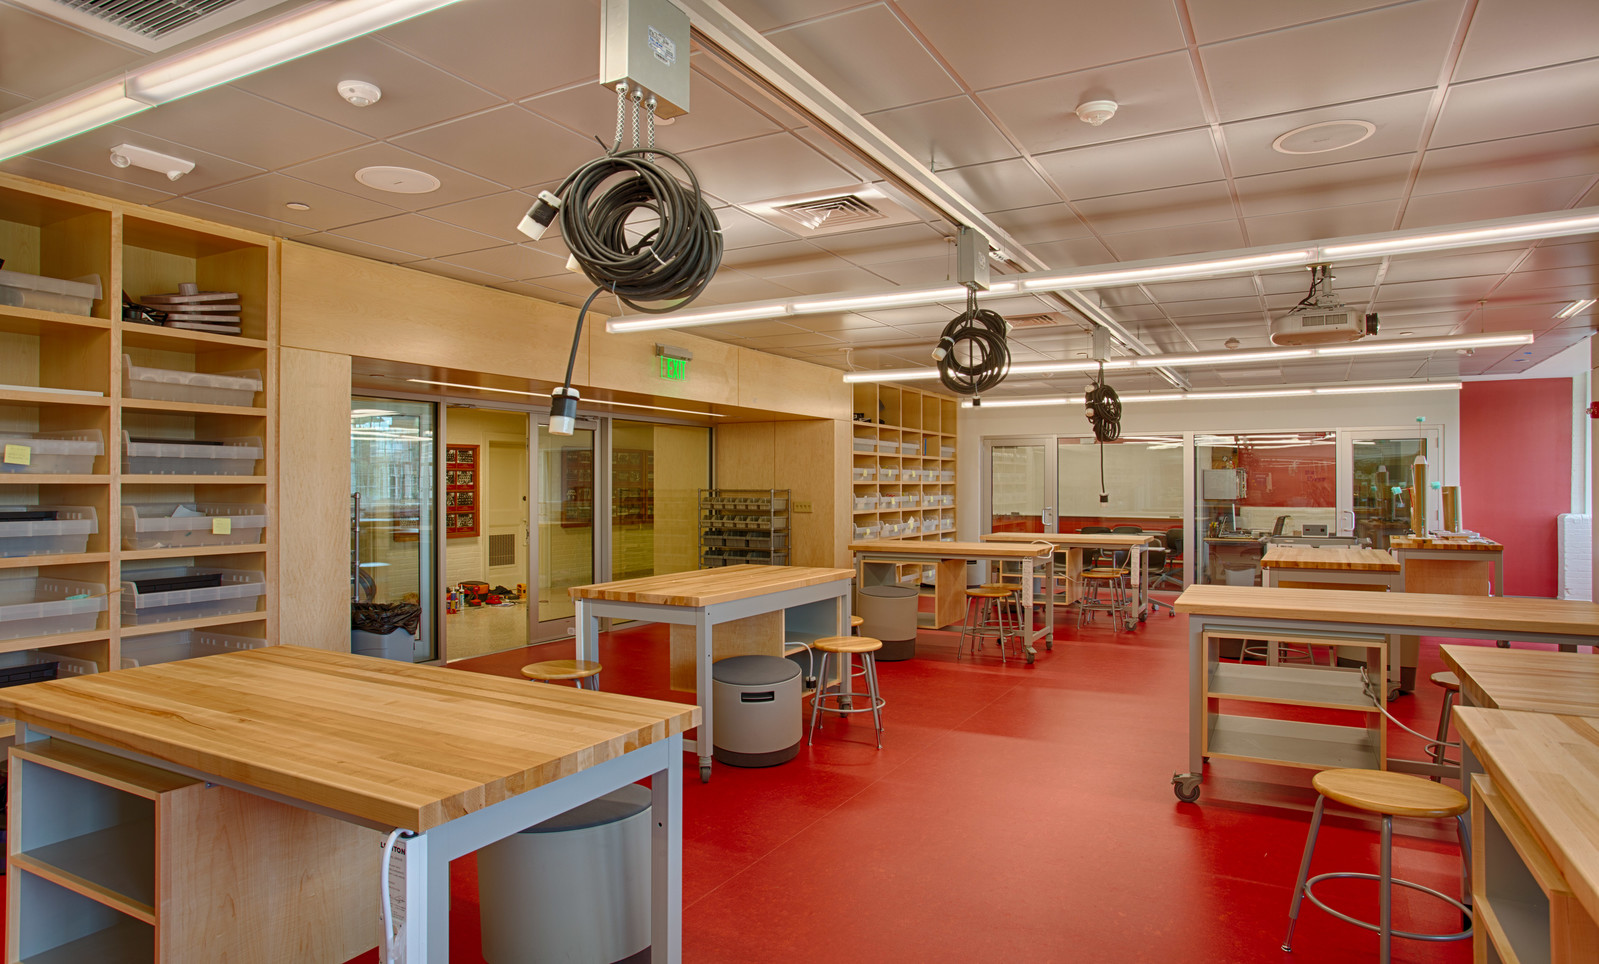 We furnished the built-ins for this high school lab space